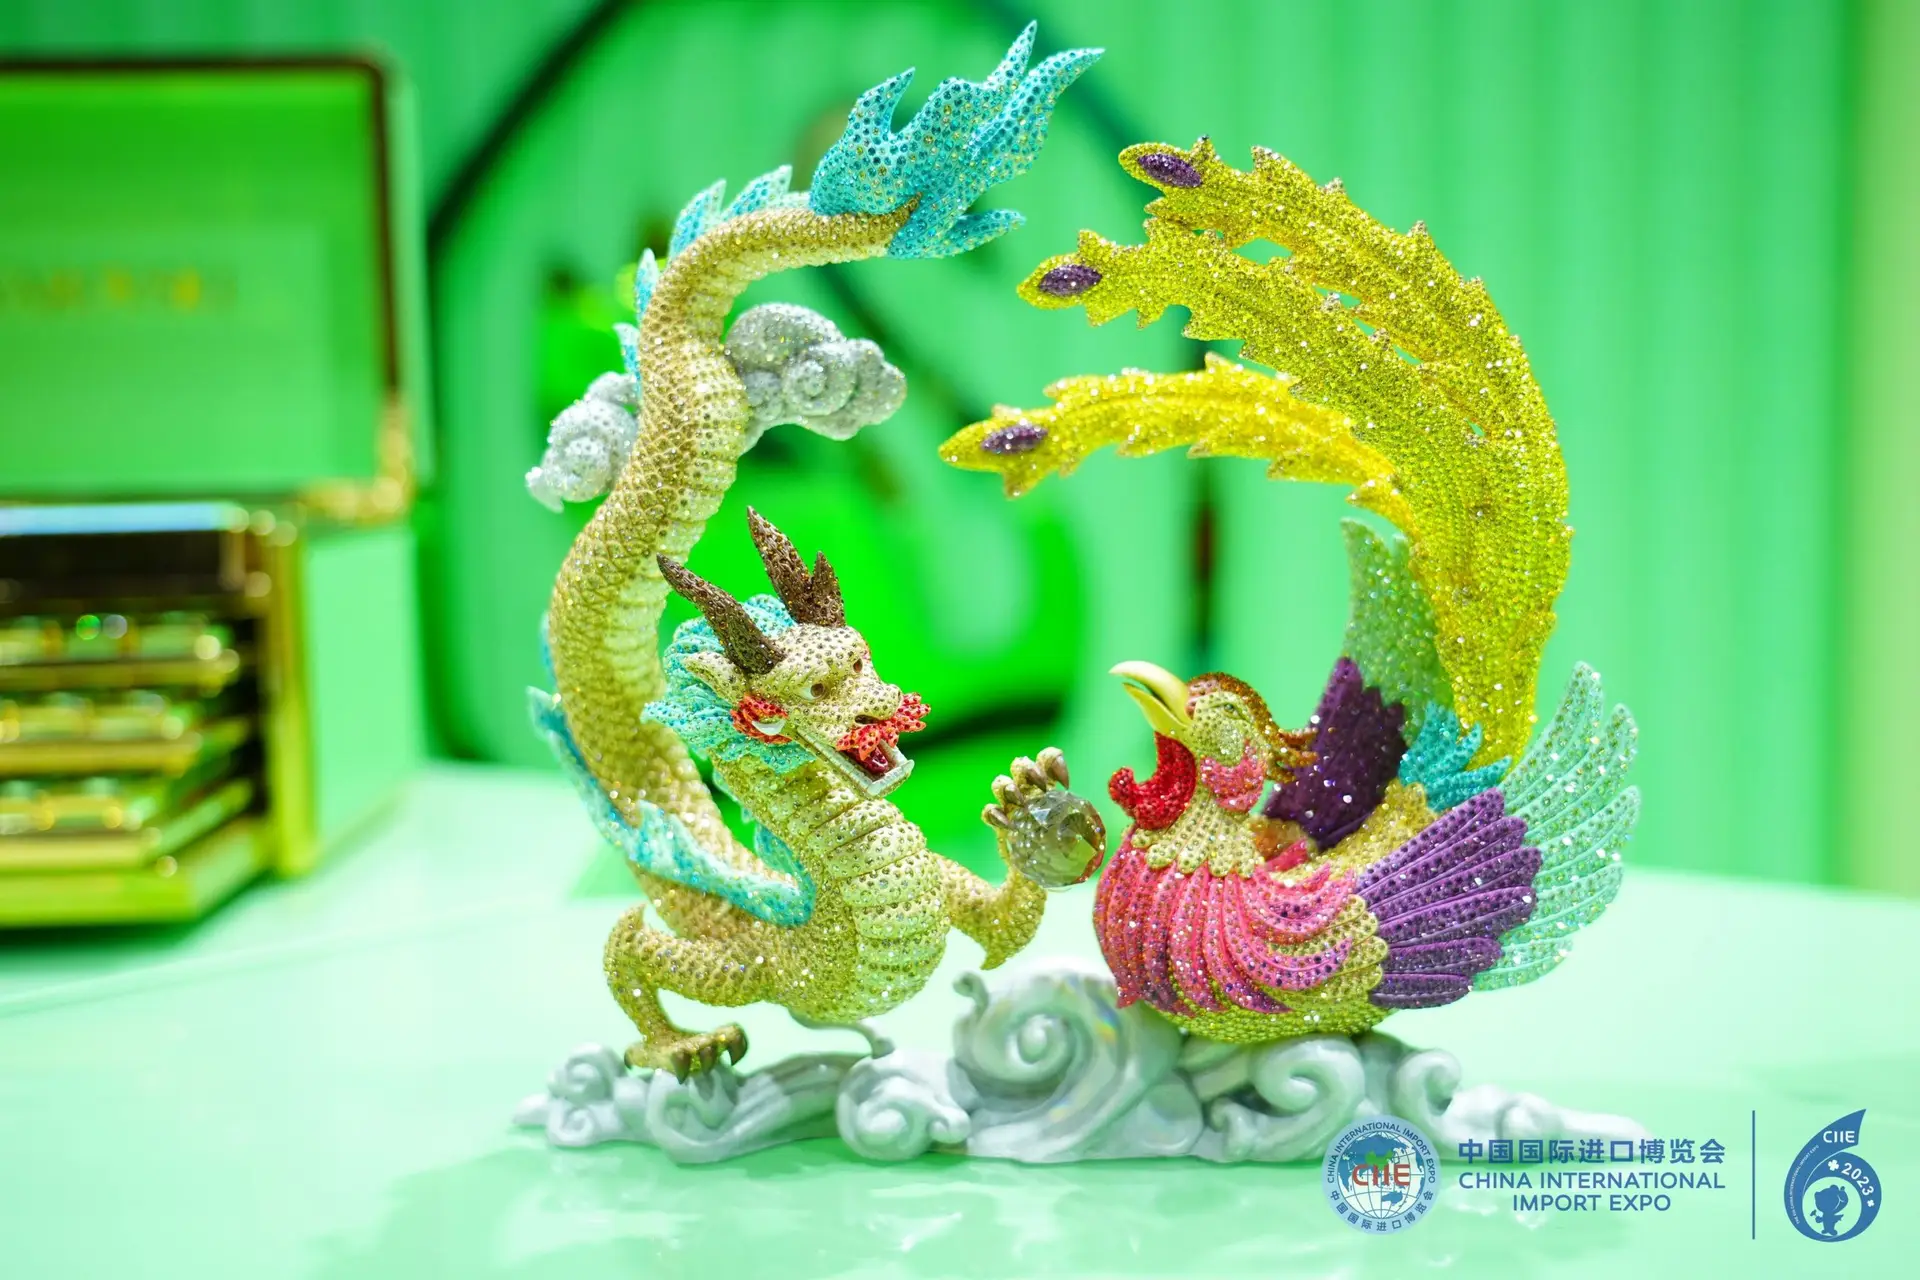 Austrian brand Swarovski showcased its Mesmera and Celebrate Wonder series, including the eye-catching Crystal Myriad Dragon and Phoenix collectible for the 2024 Chinese New Year. Each piece of the decoration, adorned with approximately 30,500 Swarovski crystals, has taken craftsmen 308 hours to complete.